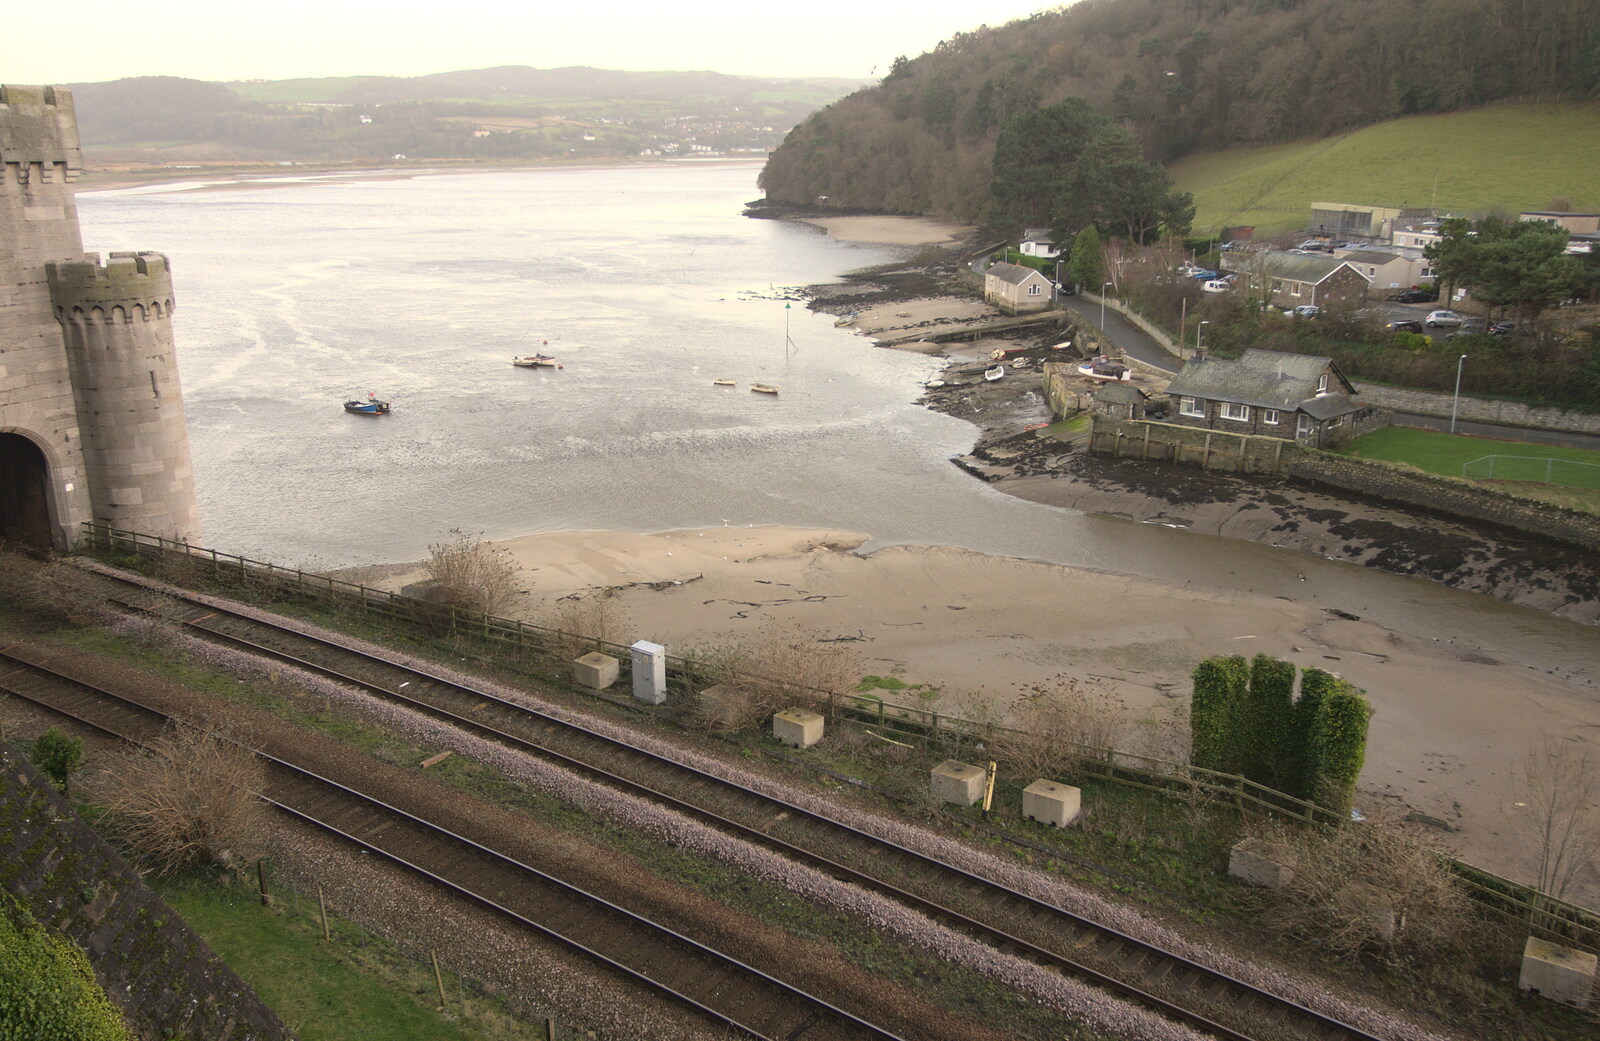 The adjacent railway lines from Conwy, Holyhead and the Ferry to Ireland - 21st December 2015